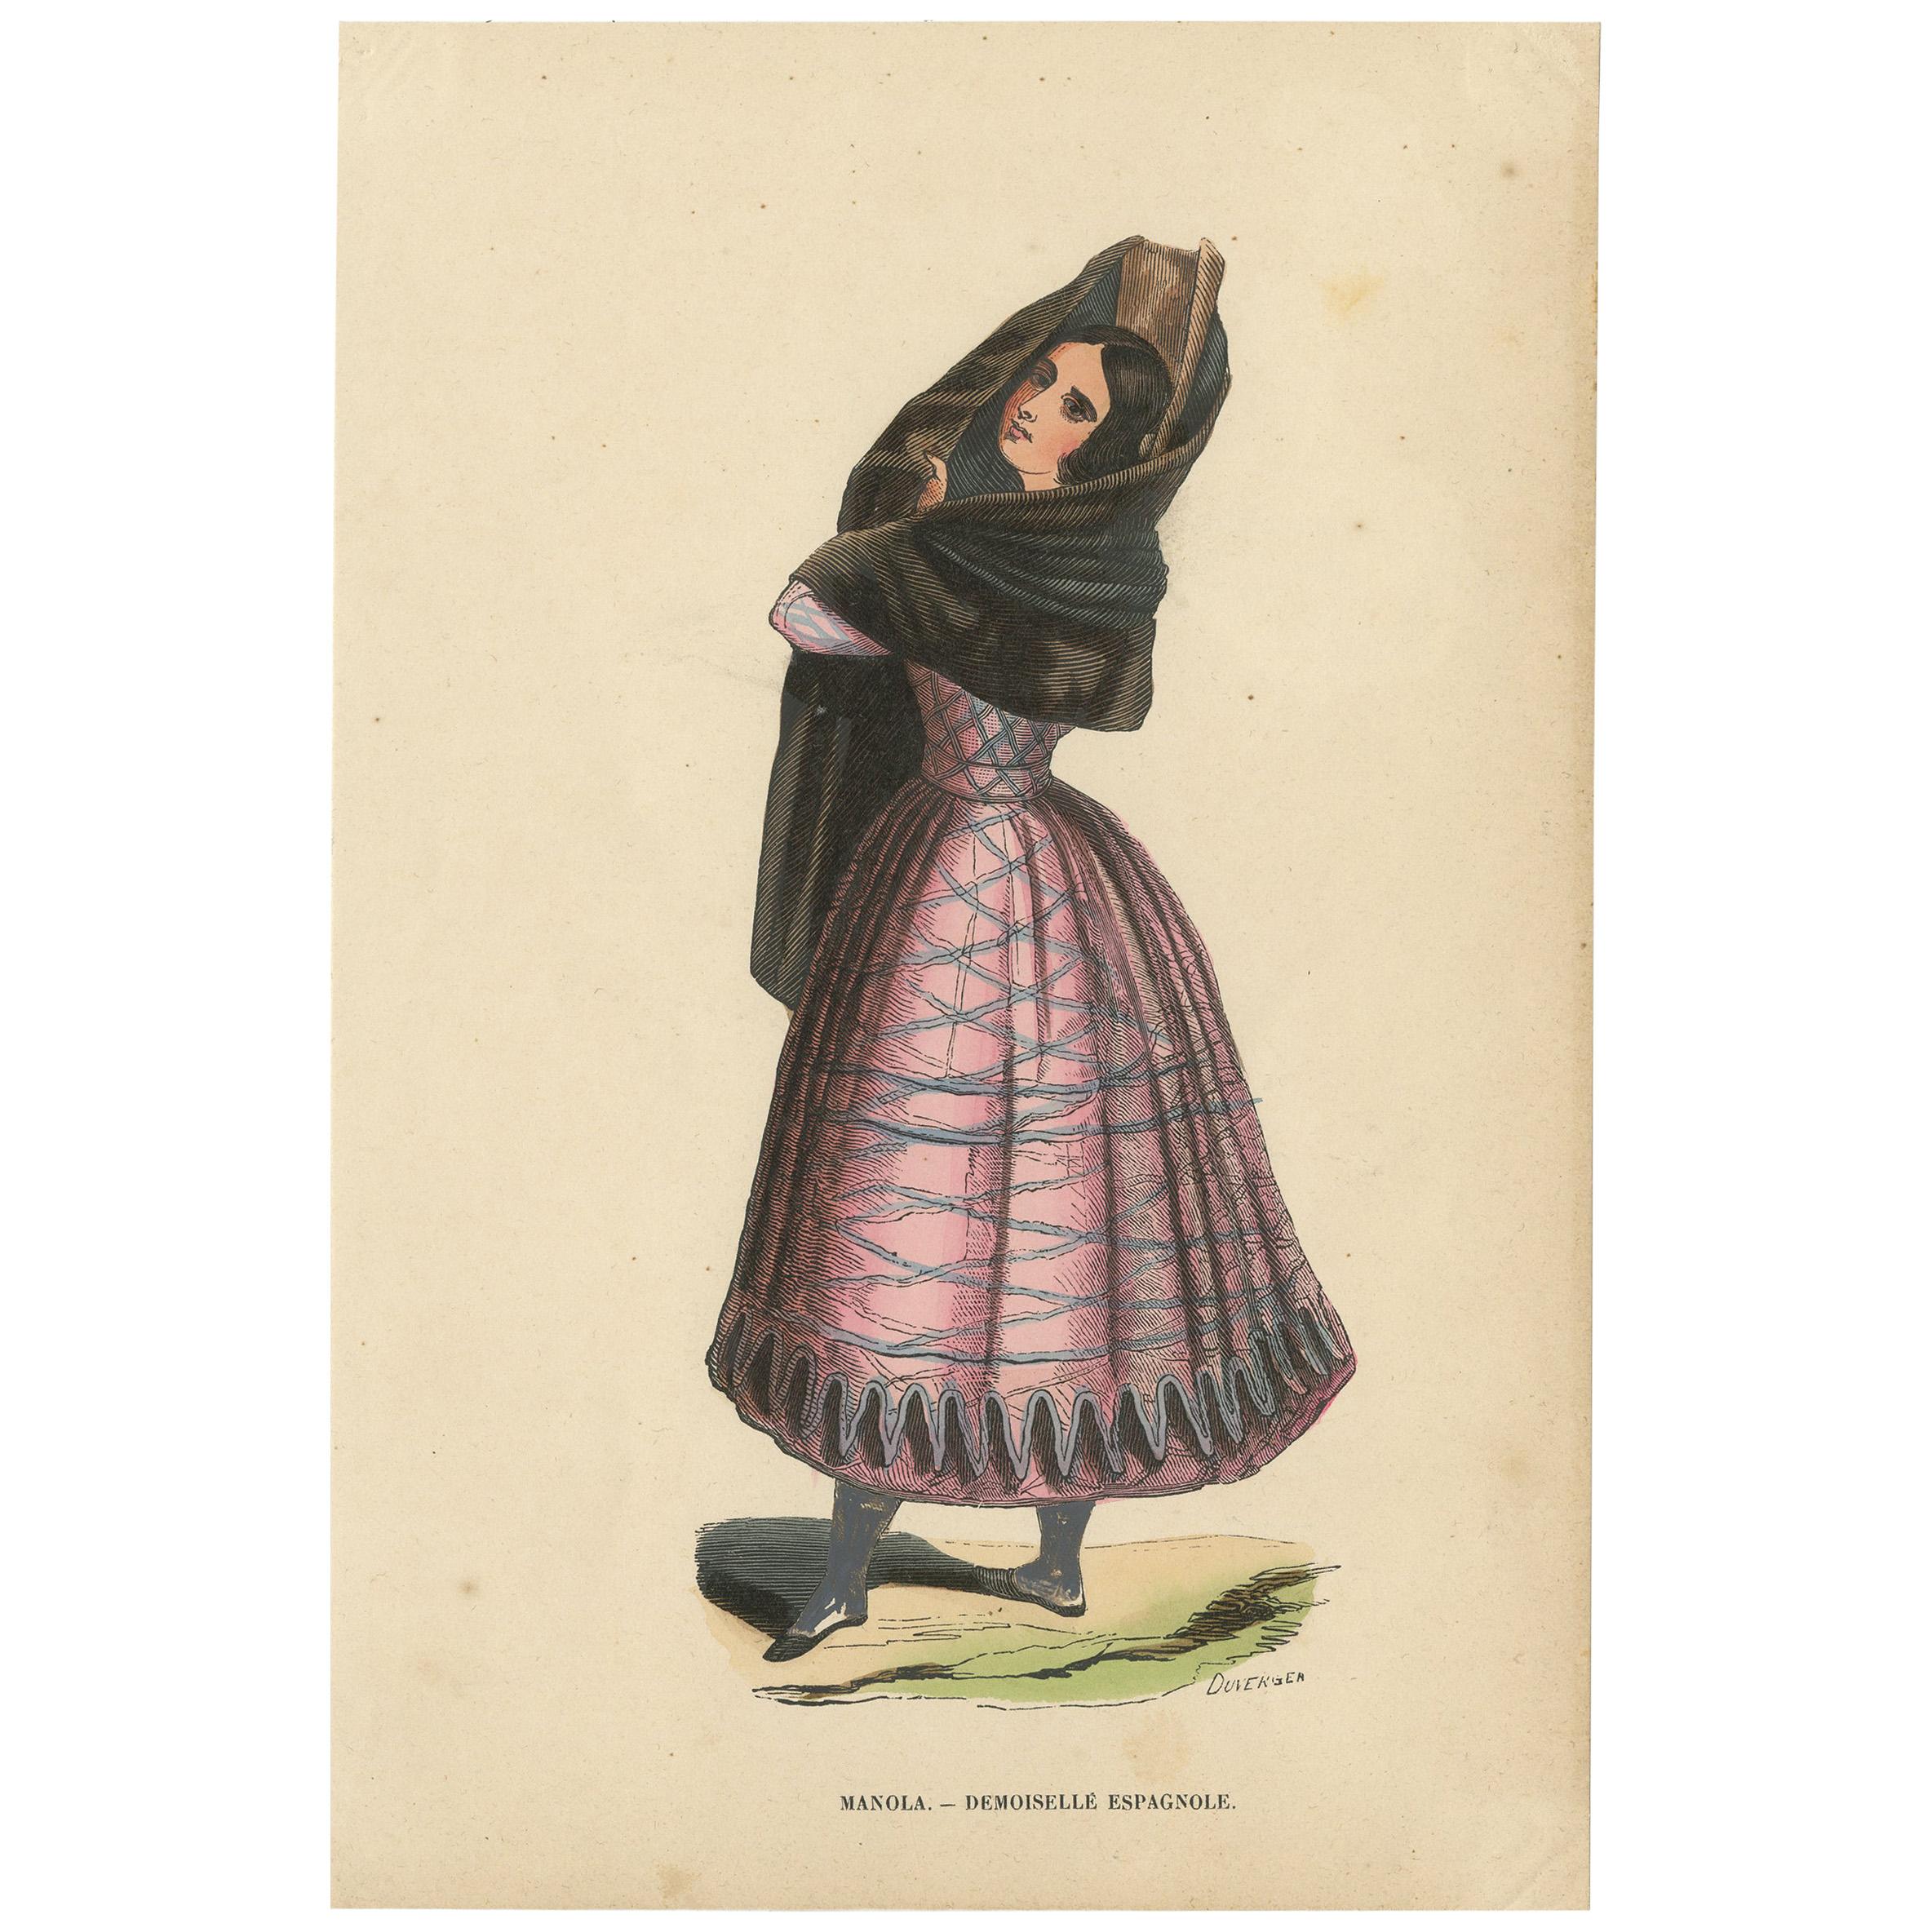 Antique Costume Print of a Lady in Traditional Spanish Costume by Wahlen, 1843